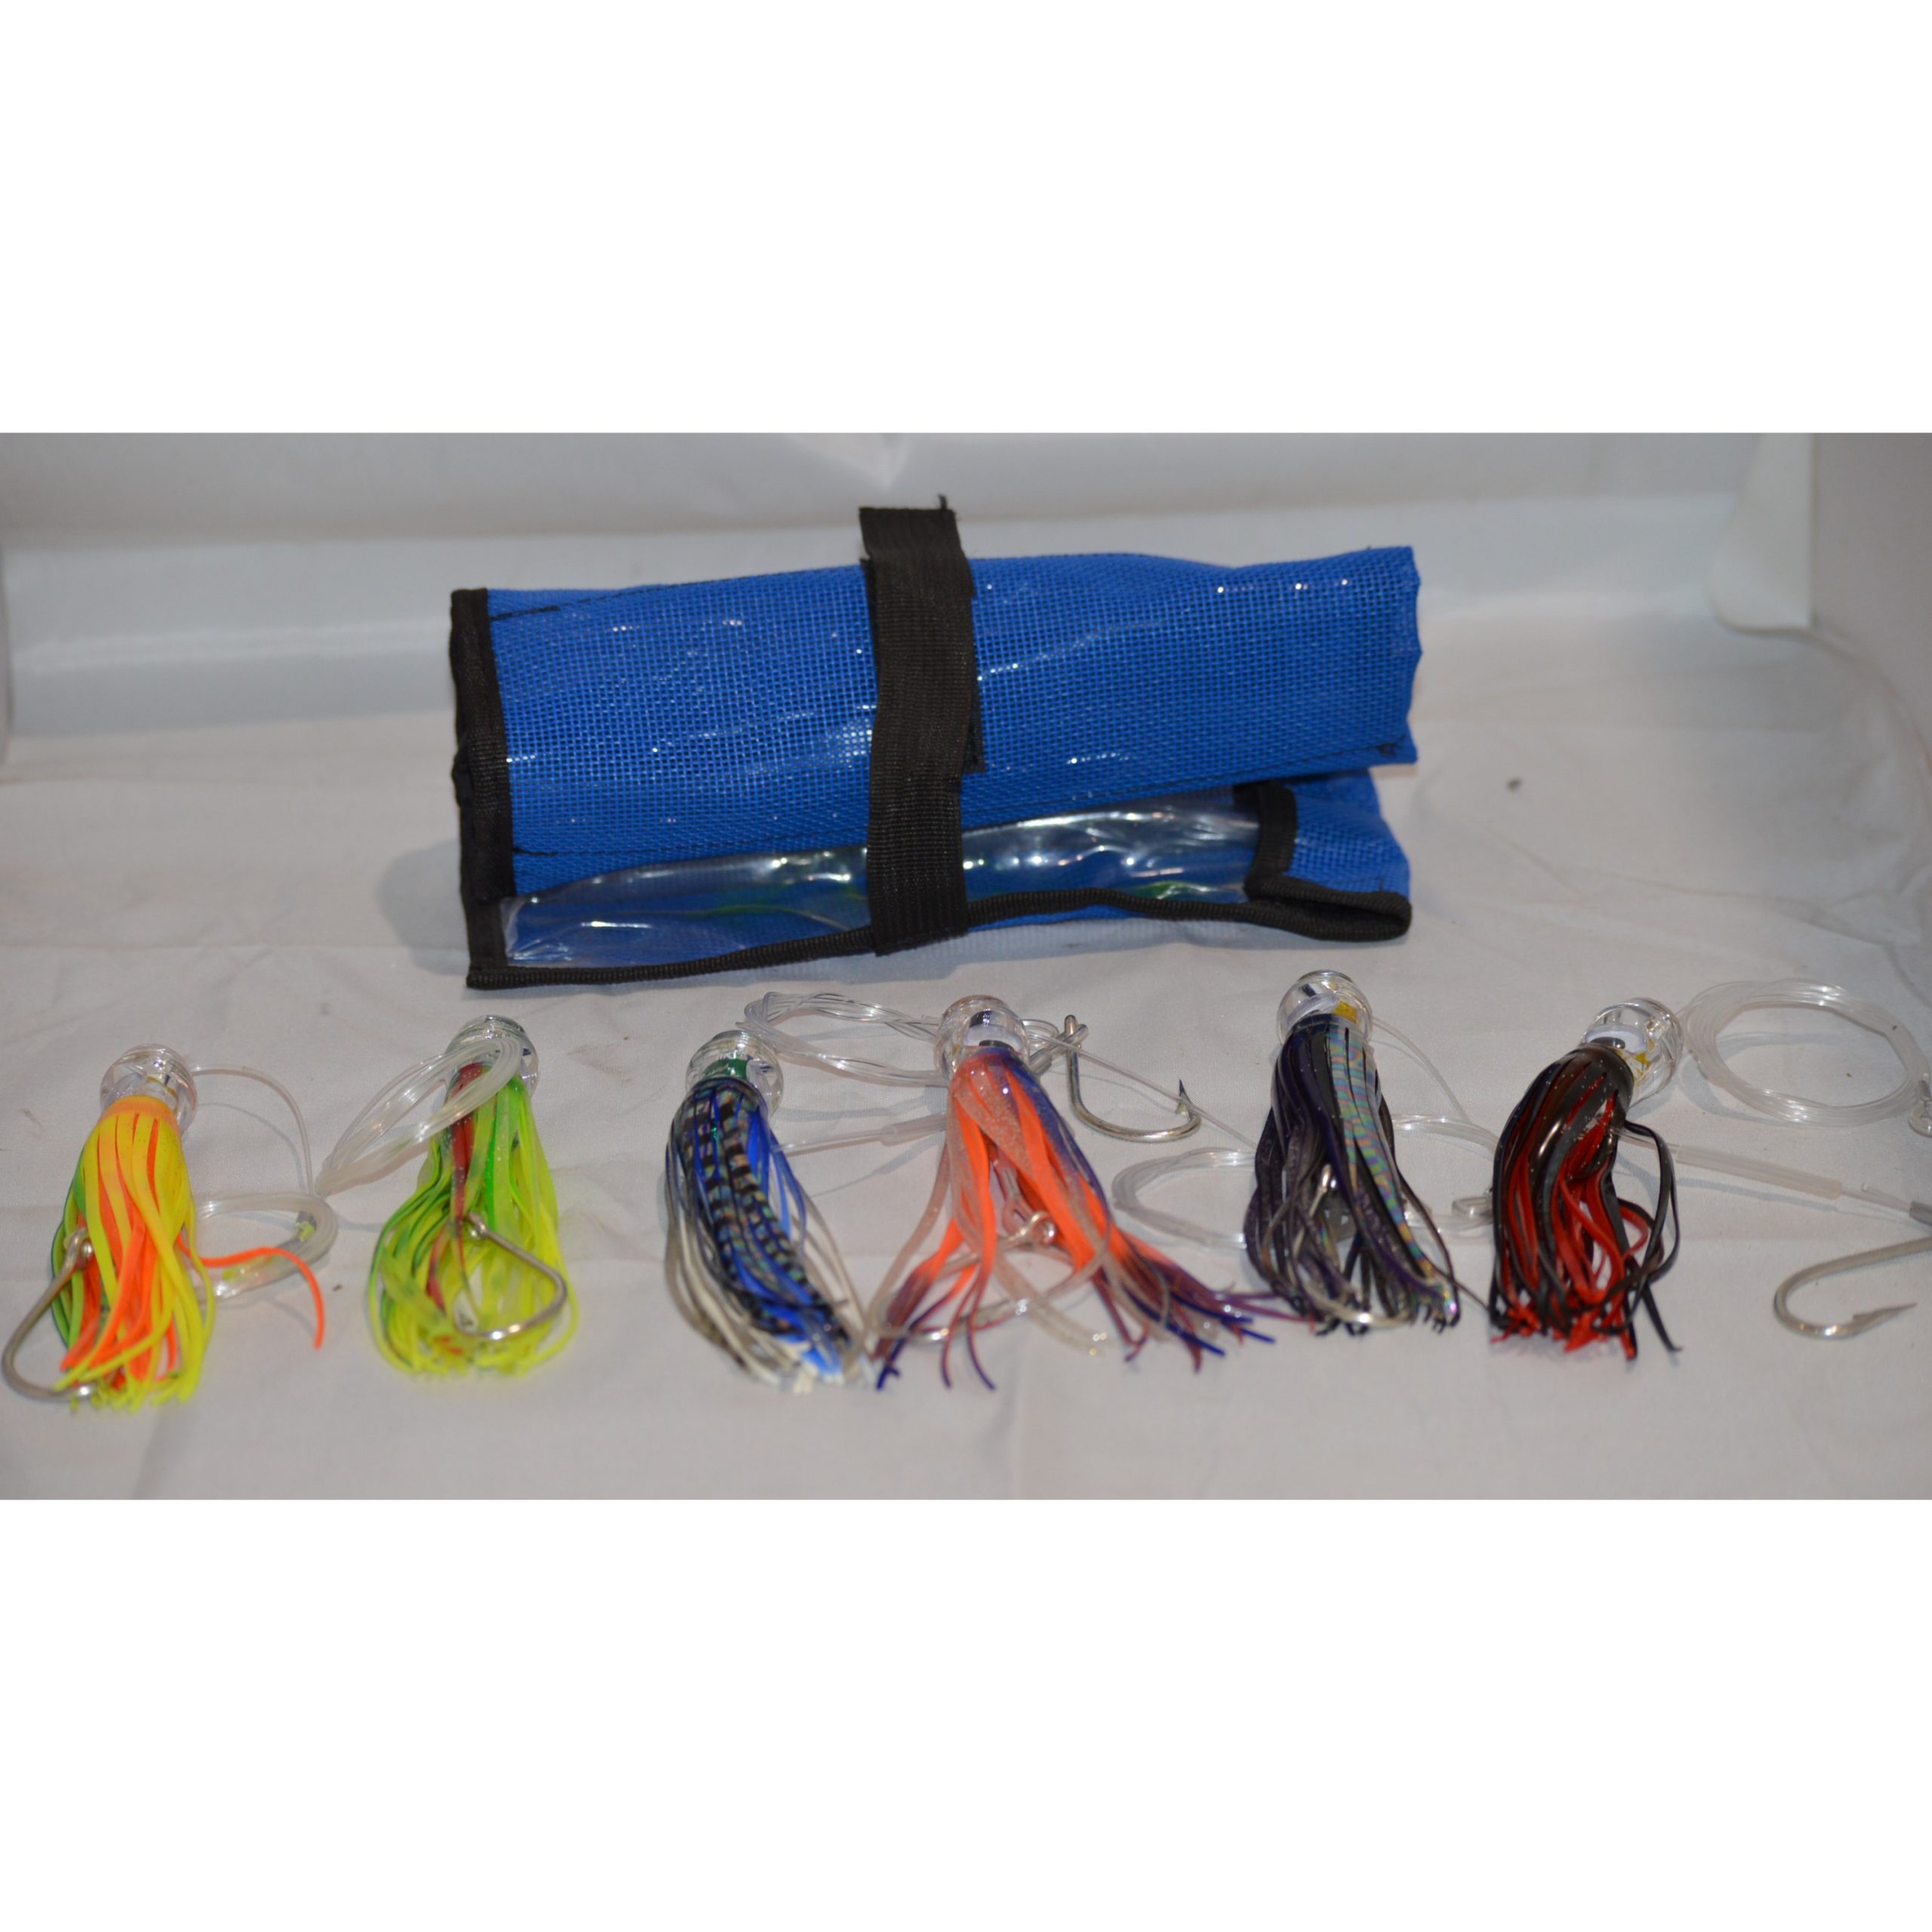 Amish Outfitters trolling bags(2) - Classifieds - Buy, Sell, Trade or Rent  - Lake Ontario United - Lake Ontario's Largest Fishing & Hunting Community  - New York and Ontario Canada